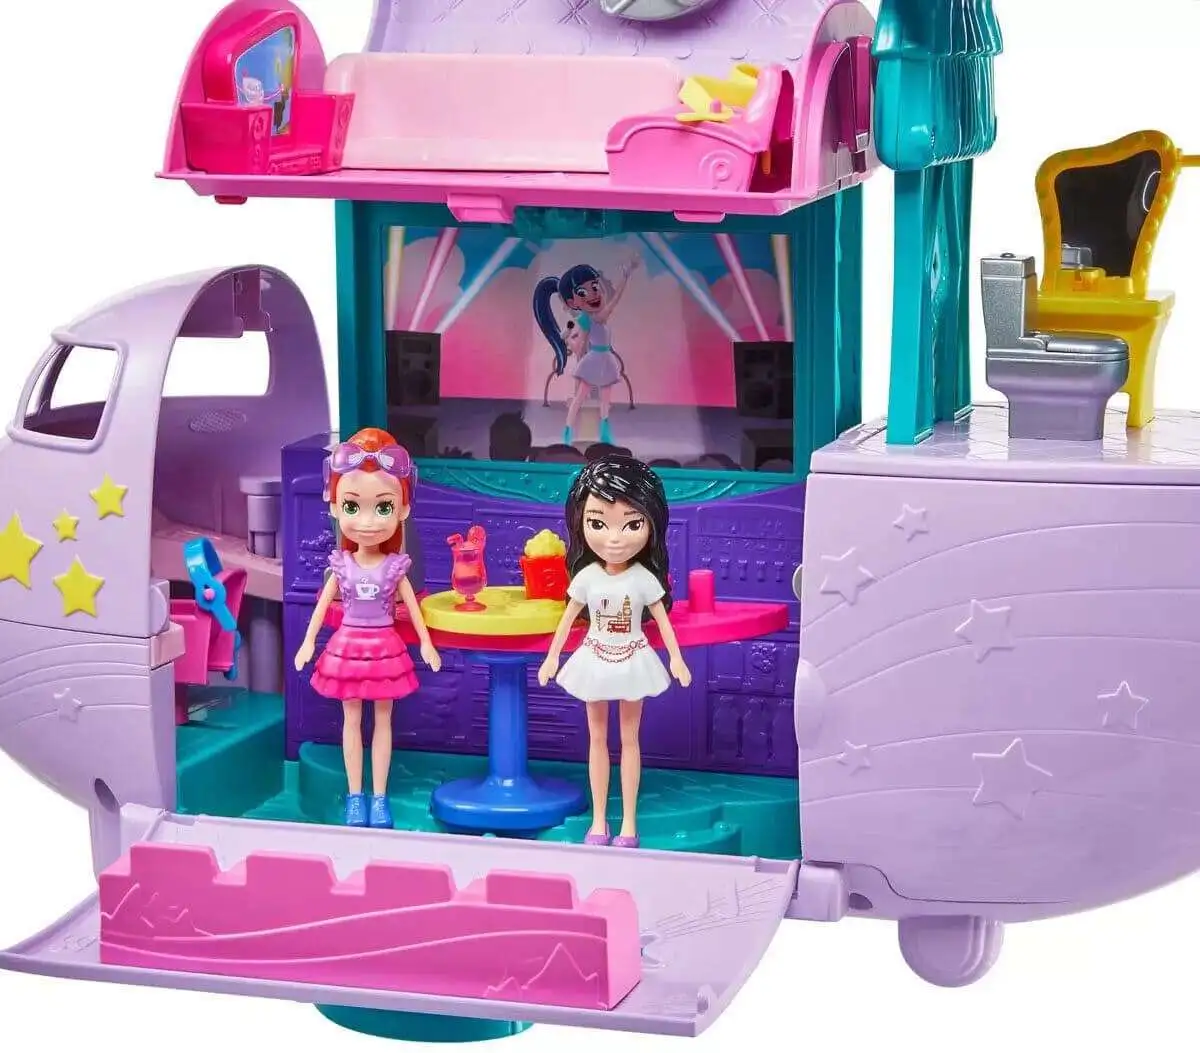 Polly Pocket Travel Adventures Pack Exclusive